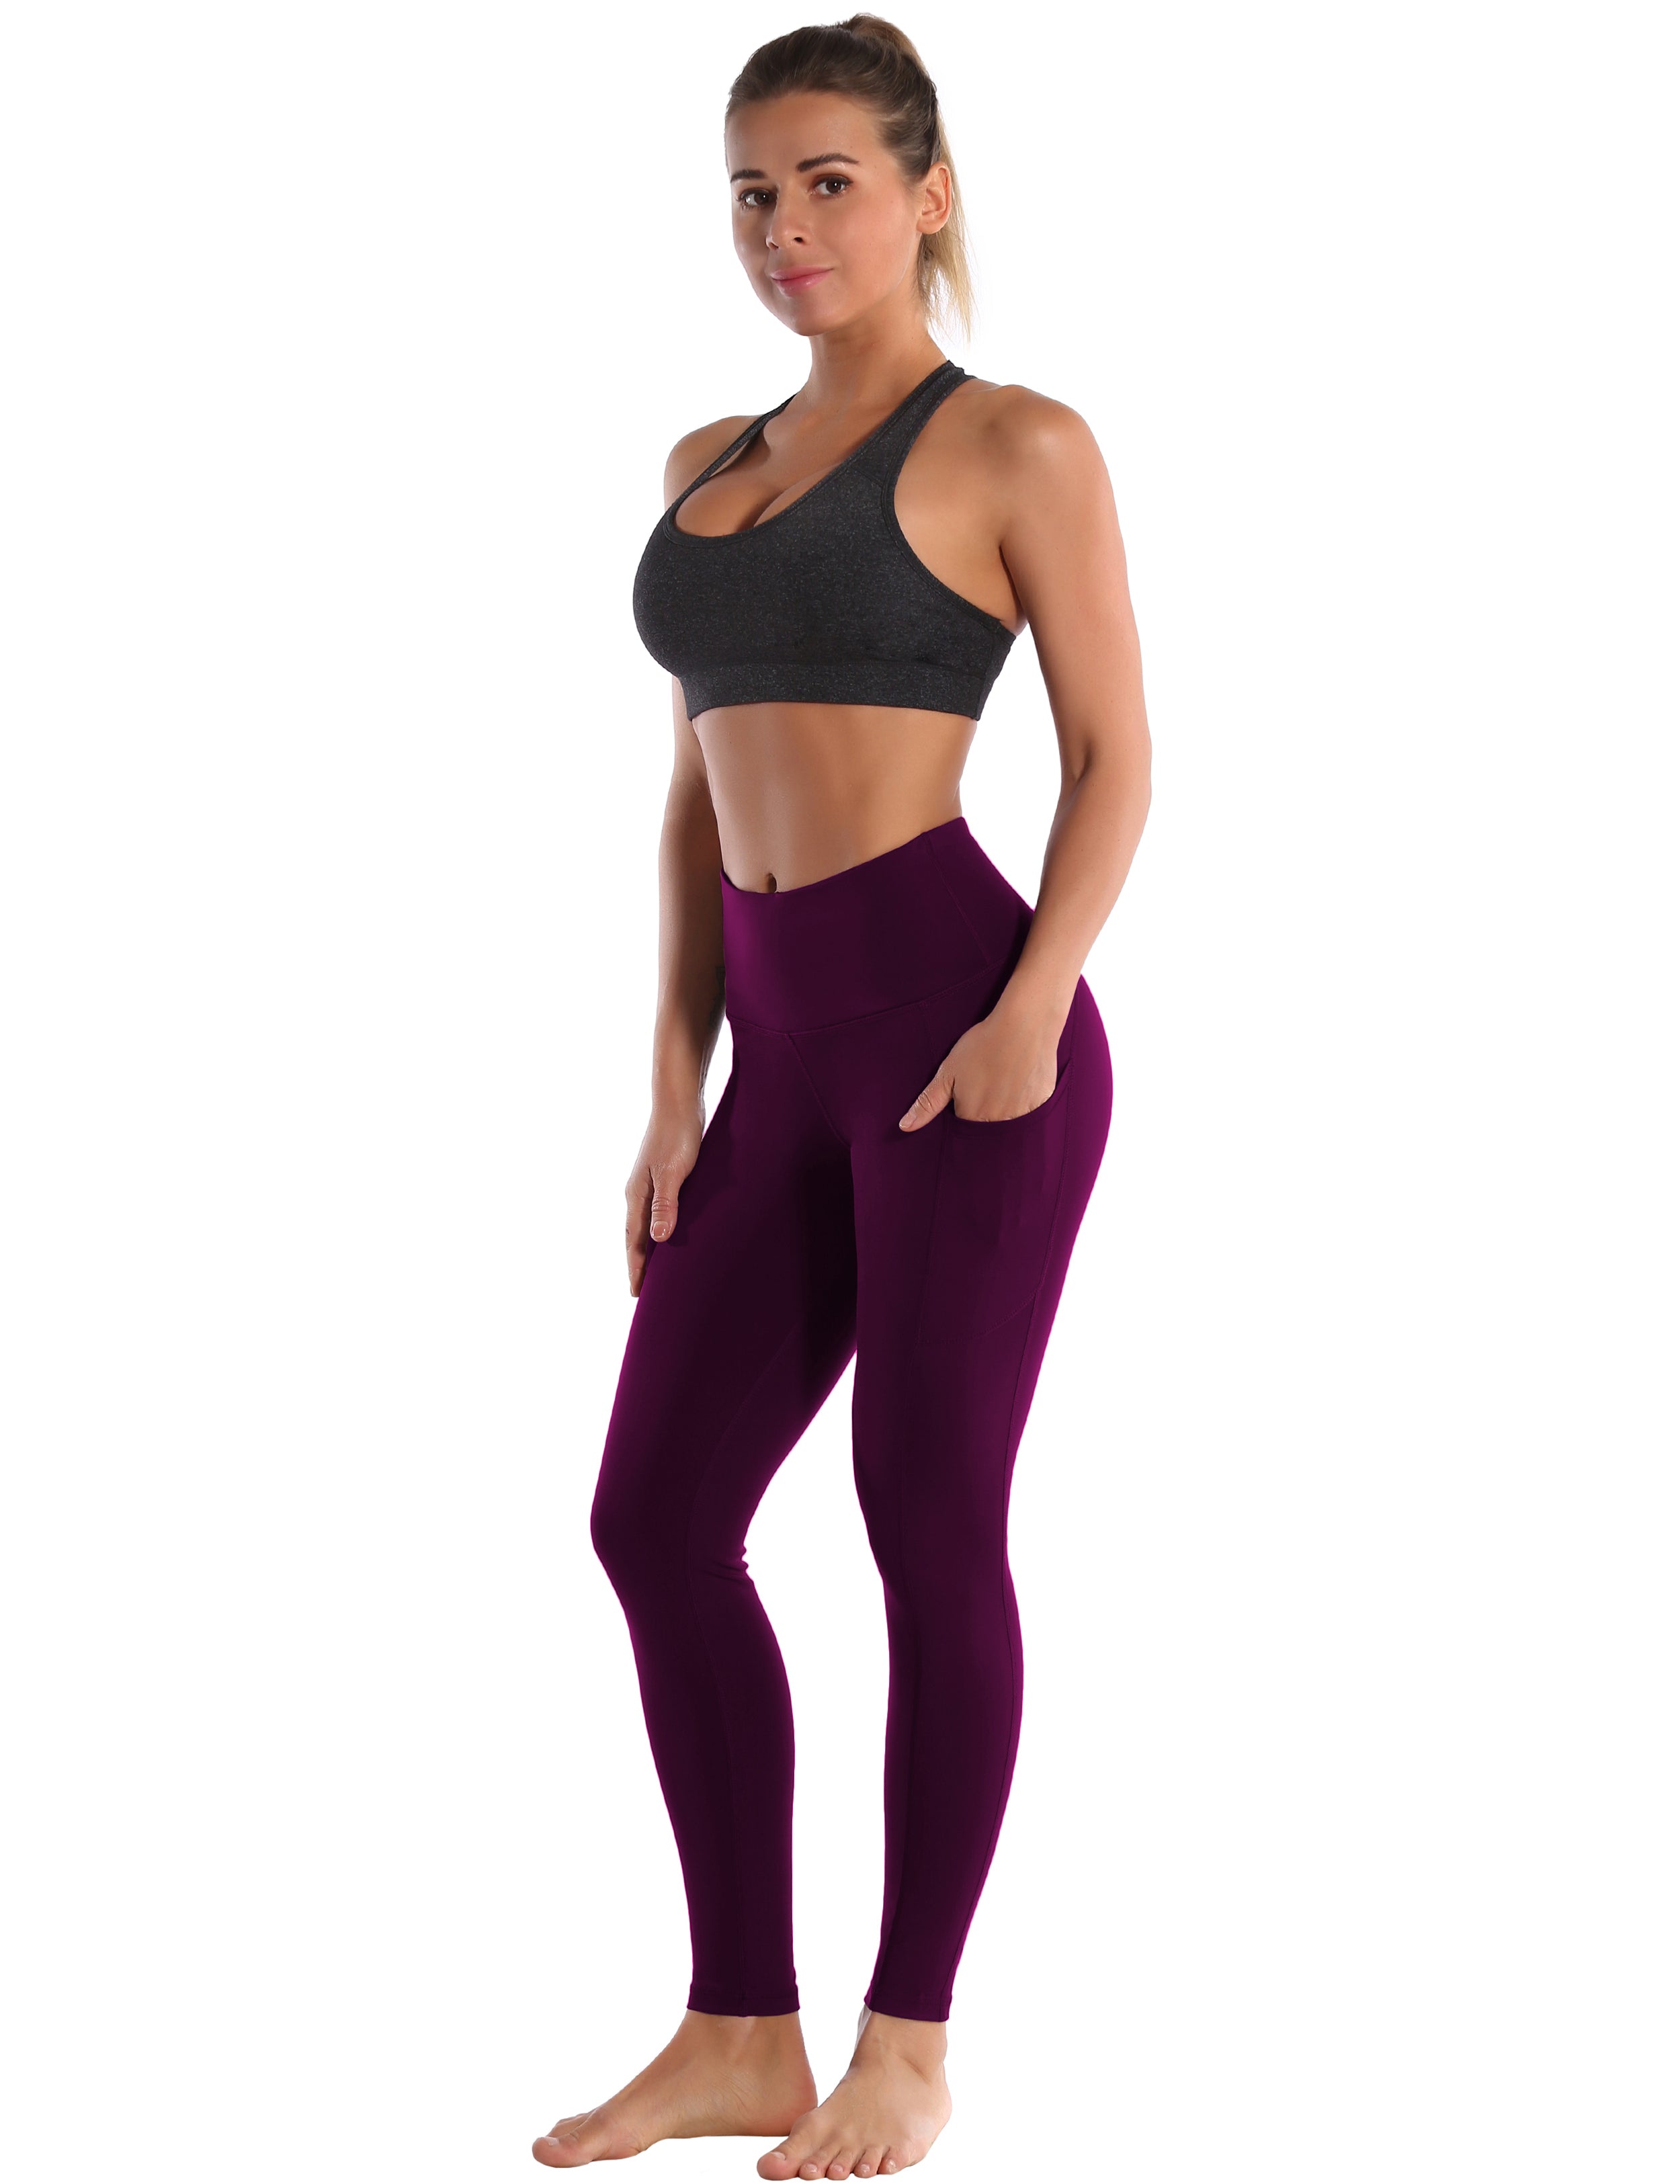 Hip Line Side Pockets Golf Pants plum Sexy Hip Line Side Pockets 75%Nylon/25%Spandex Fabric doesn't attract lint easily 4-way stretch No see-through Moisture-wicking Tummy control Inner pocket Two lengths